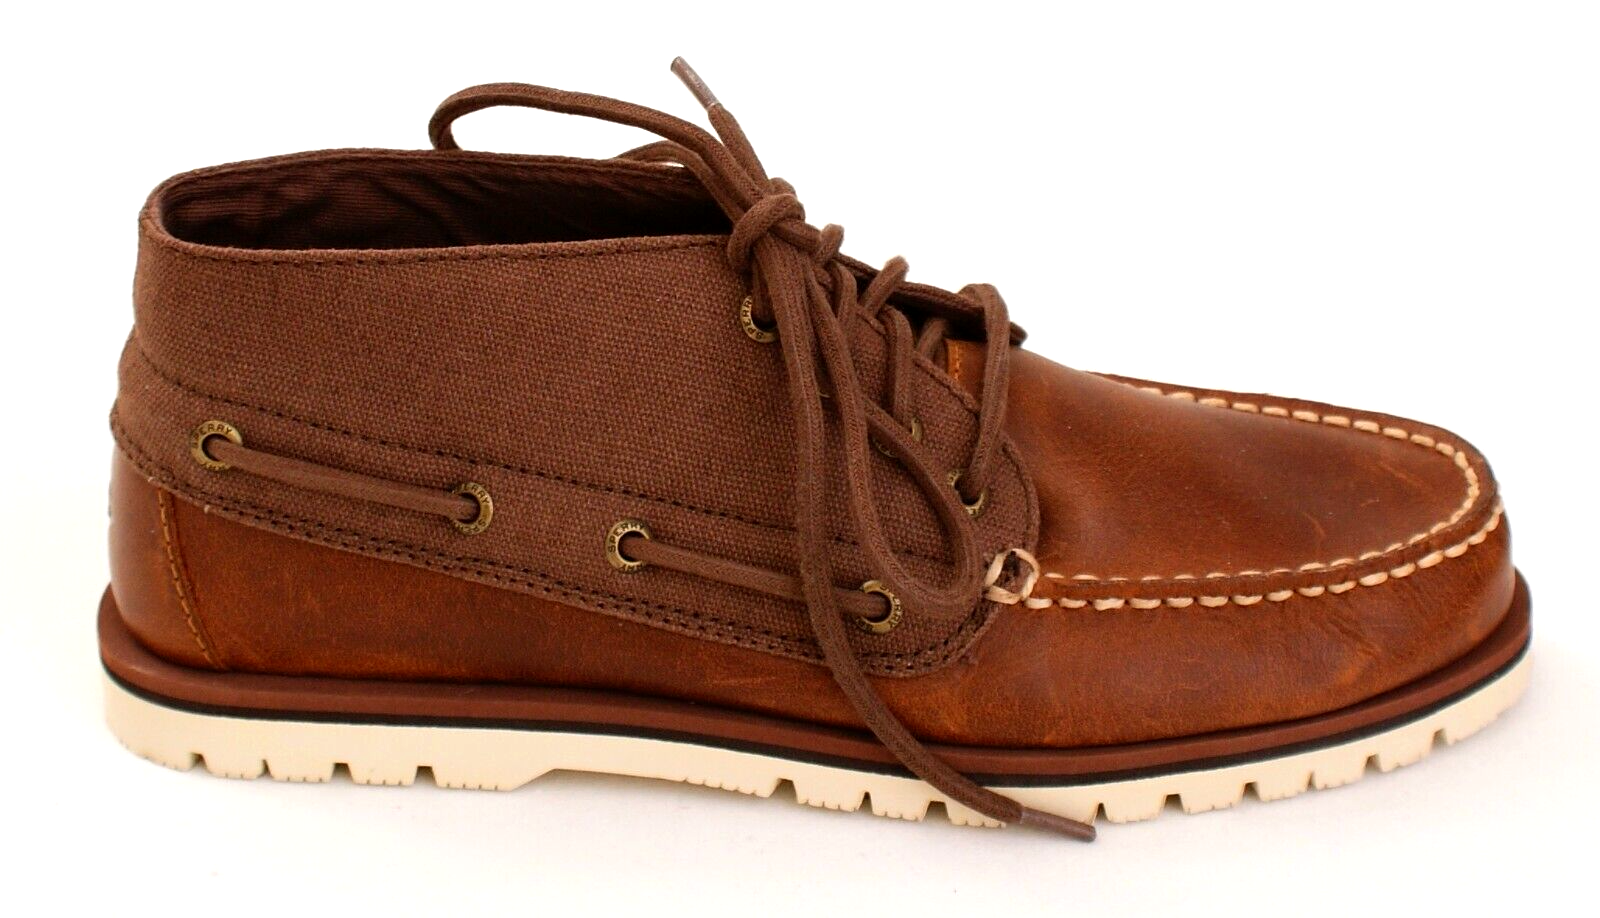 Primary image for Sperry Leather & Canvas Leeward Mini Lug Chukka Boots Men's Size 7.5 M